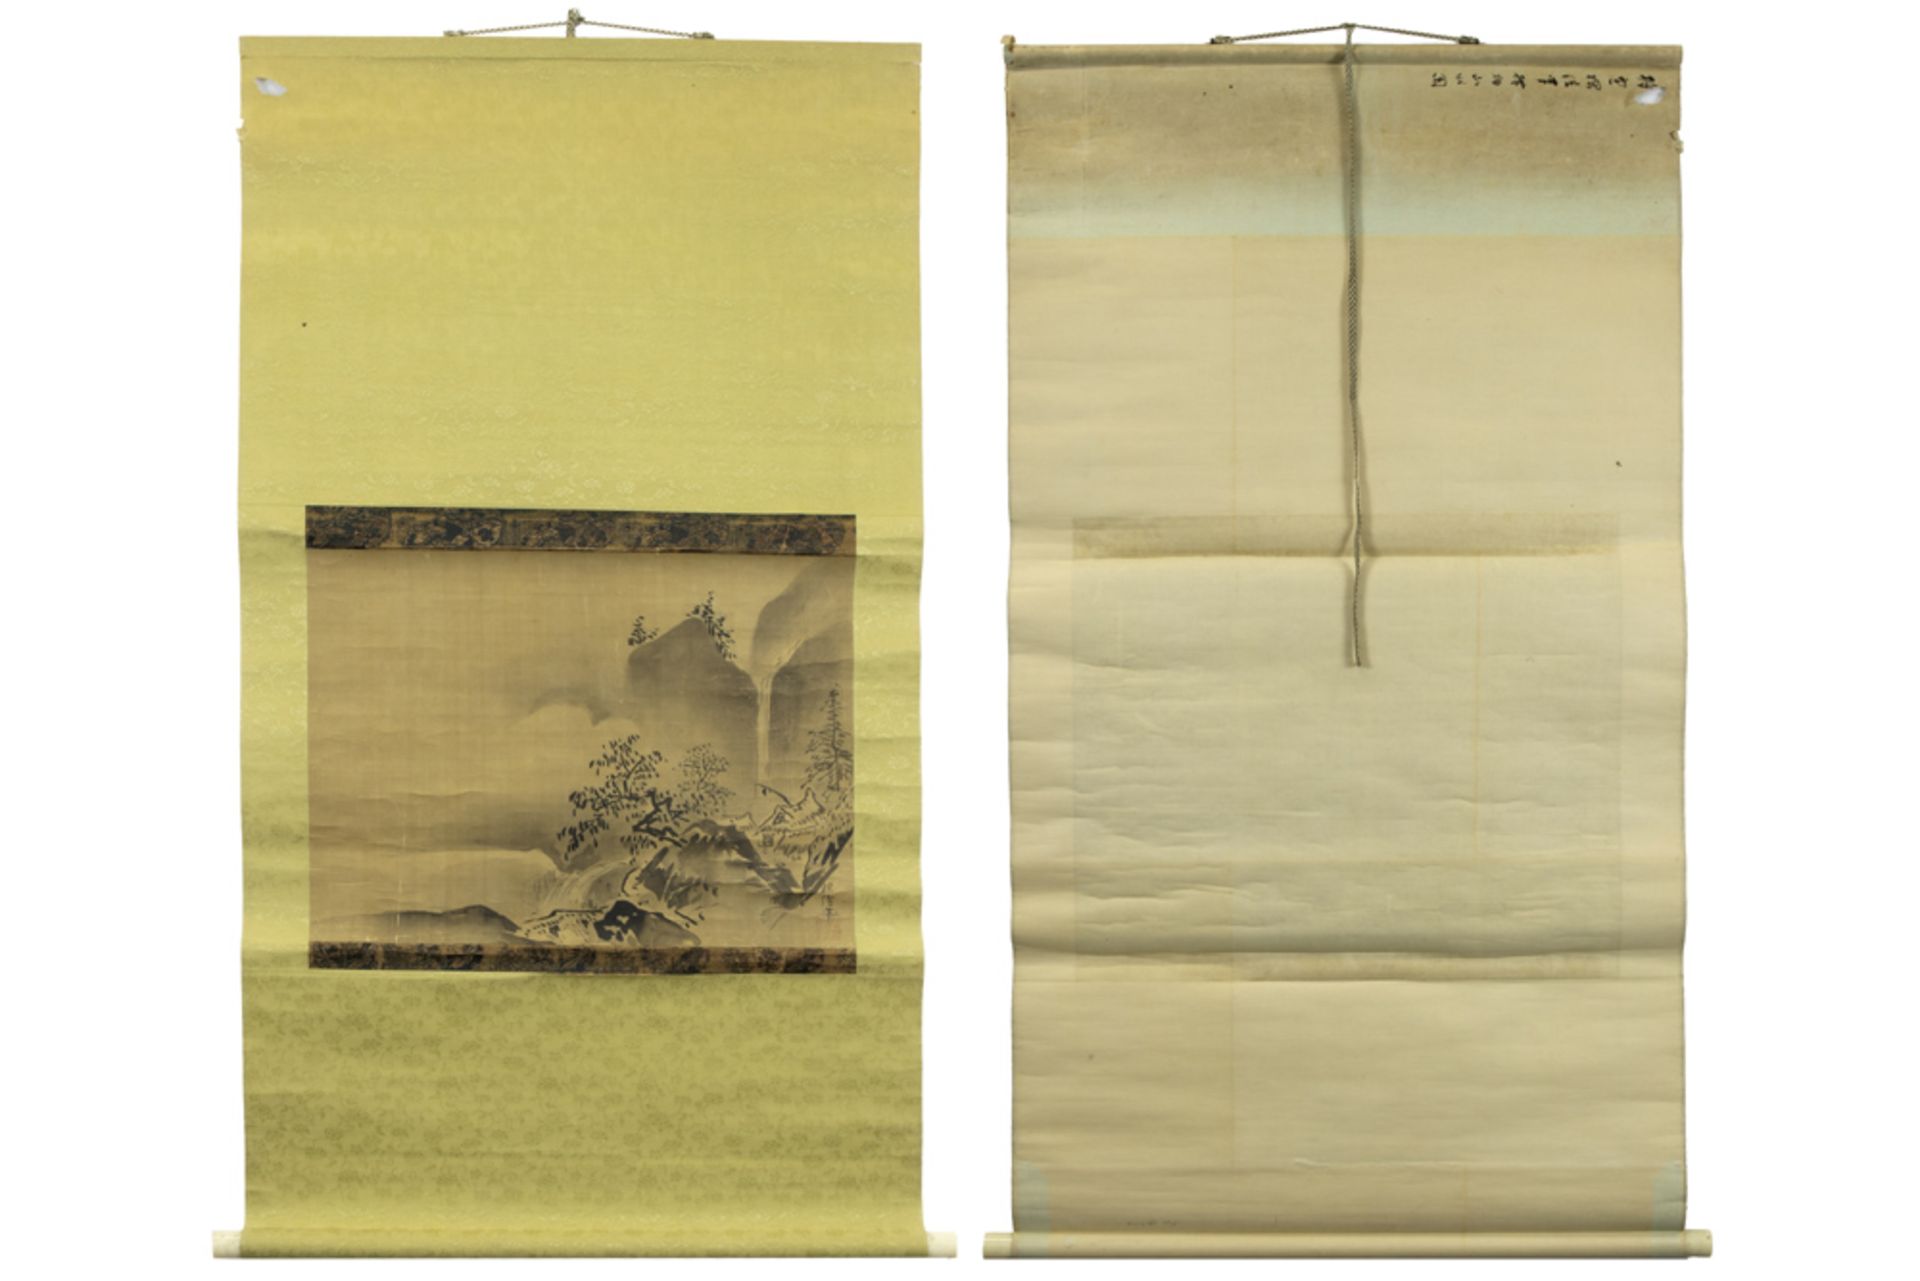 Chinese scroll with an antique black ink painting with a landscape || Chinese rol met antieke